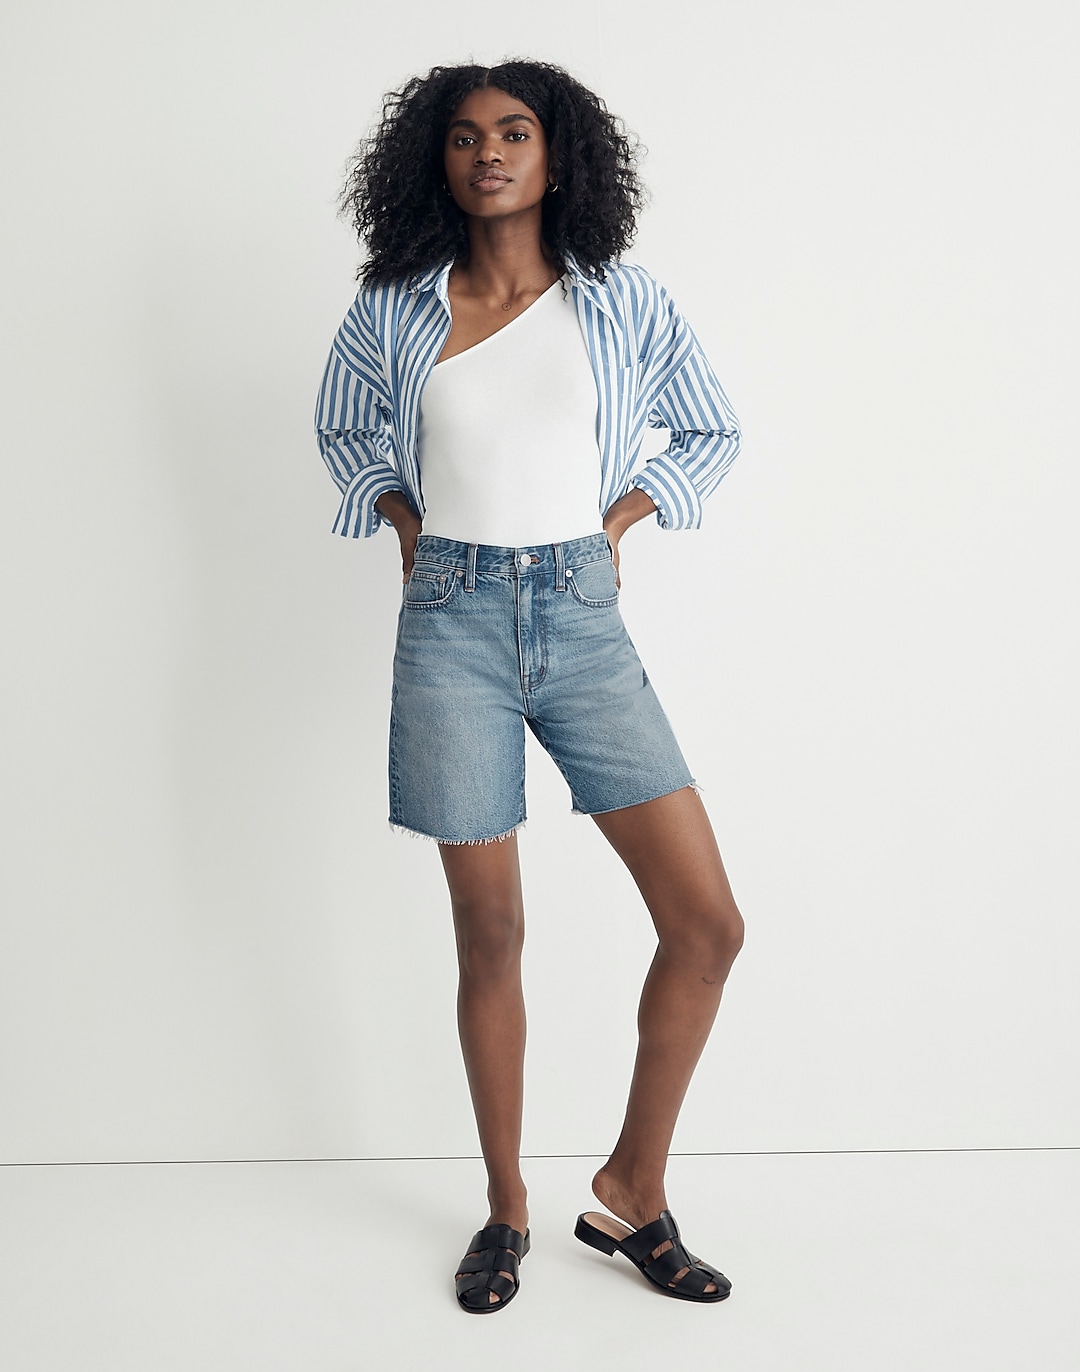 Baggy Jean Shorts in Crestford Wash | Madewell